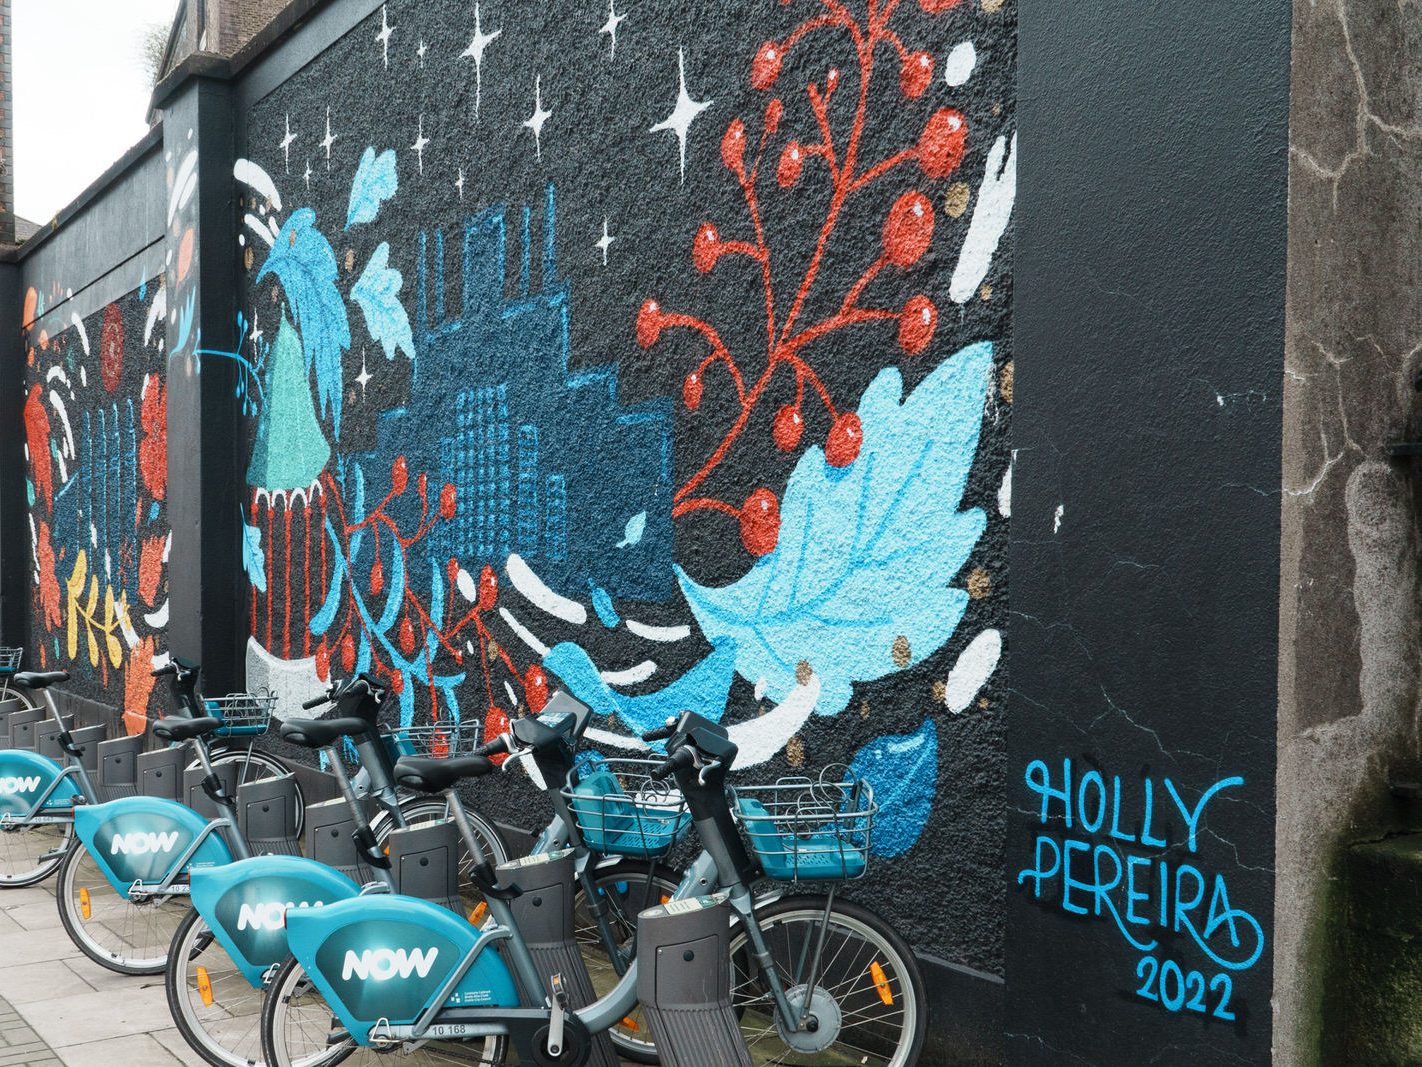 TWO FOR THE PRICE OF ONE [DUBLINBIKES DOCKING STATION 75 AND A MURAL BY HOLLY PEREIRA]-229686-1